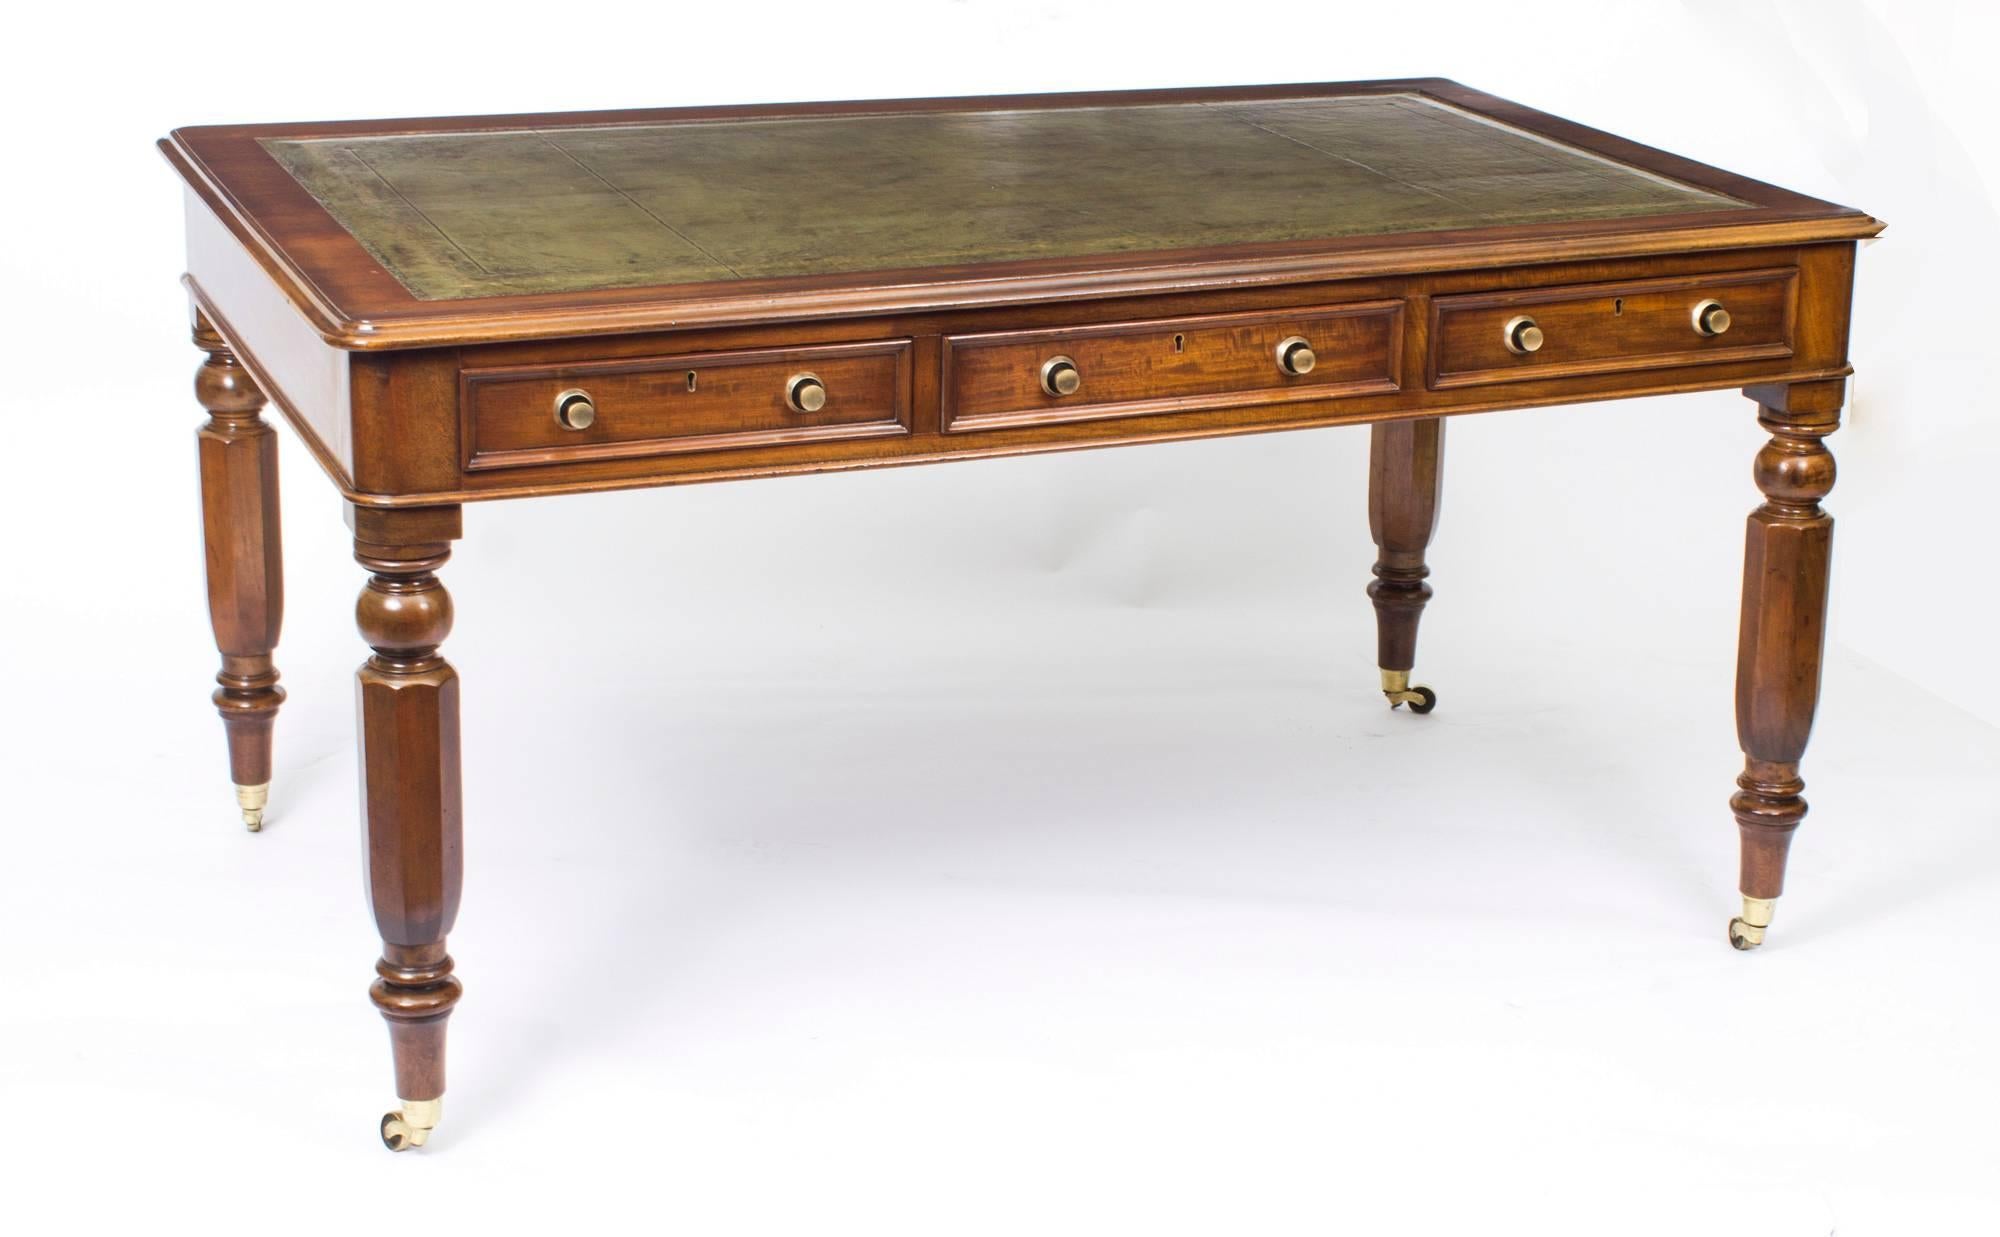 This is a gorgeous antique William IV partner's library table, circa 1840 in date.

It is crafted from beautiful solid mahogany and features a striking faded green and gold tooled inset leather top. It is raised on four faceted legs that terminate